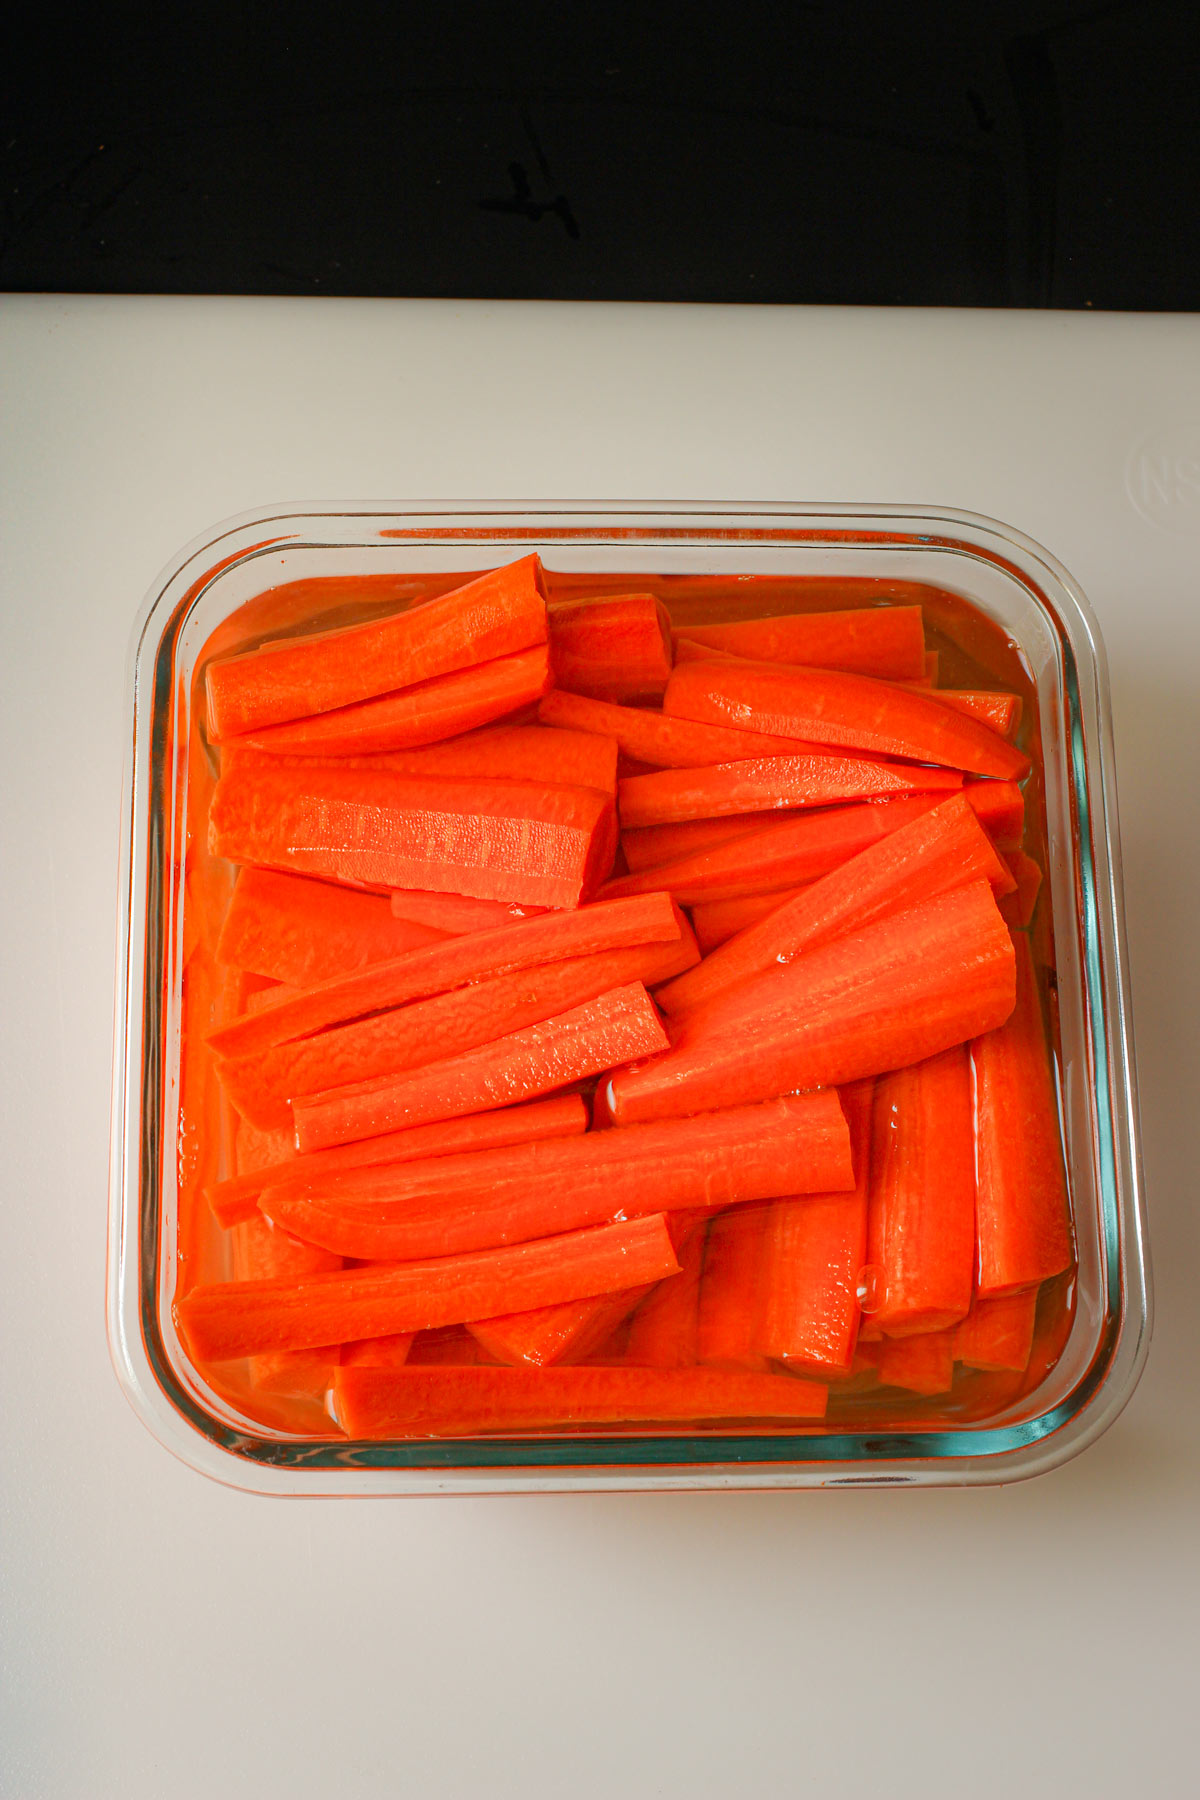 carrot sticks floating in water in glass storage container on white cutting board.